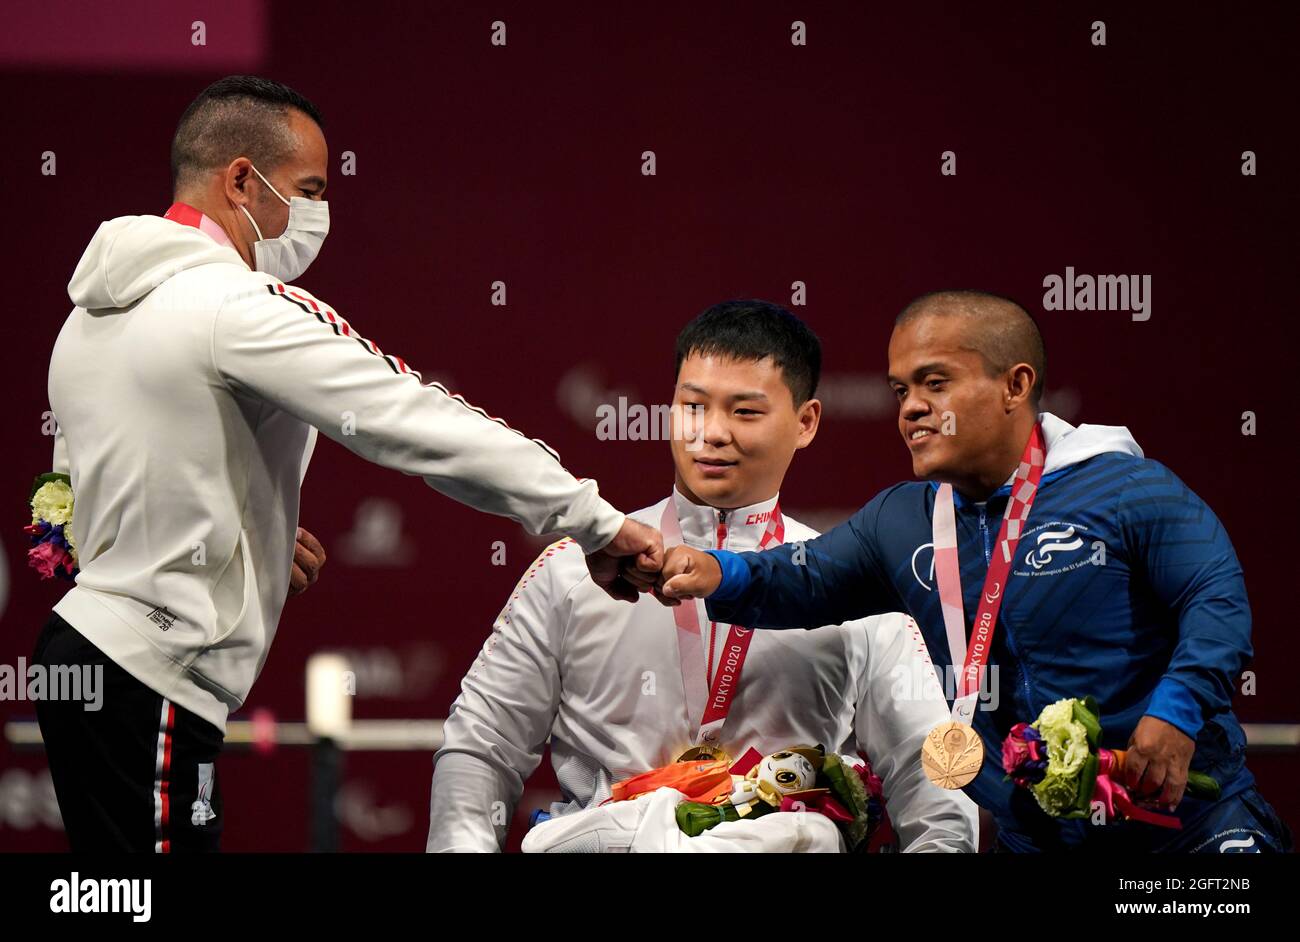 Egypt's Sherif Othman with the silver medal (left), China's Yongkai Qi with the gold (centre) and El Salvador's Herbert Aceituno with the bronze after the Men's -59 kg Final at the Tokyo International Forum during day three of the Tokyo 2020 Paralympic Games in Japan. Picture date: Friday August 27, 2021. Stock Photo